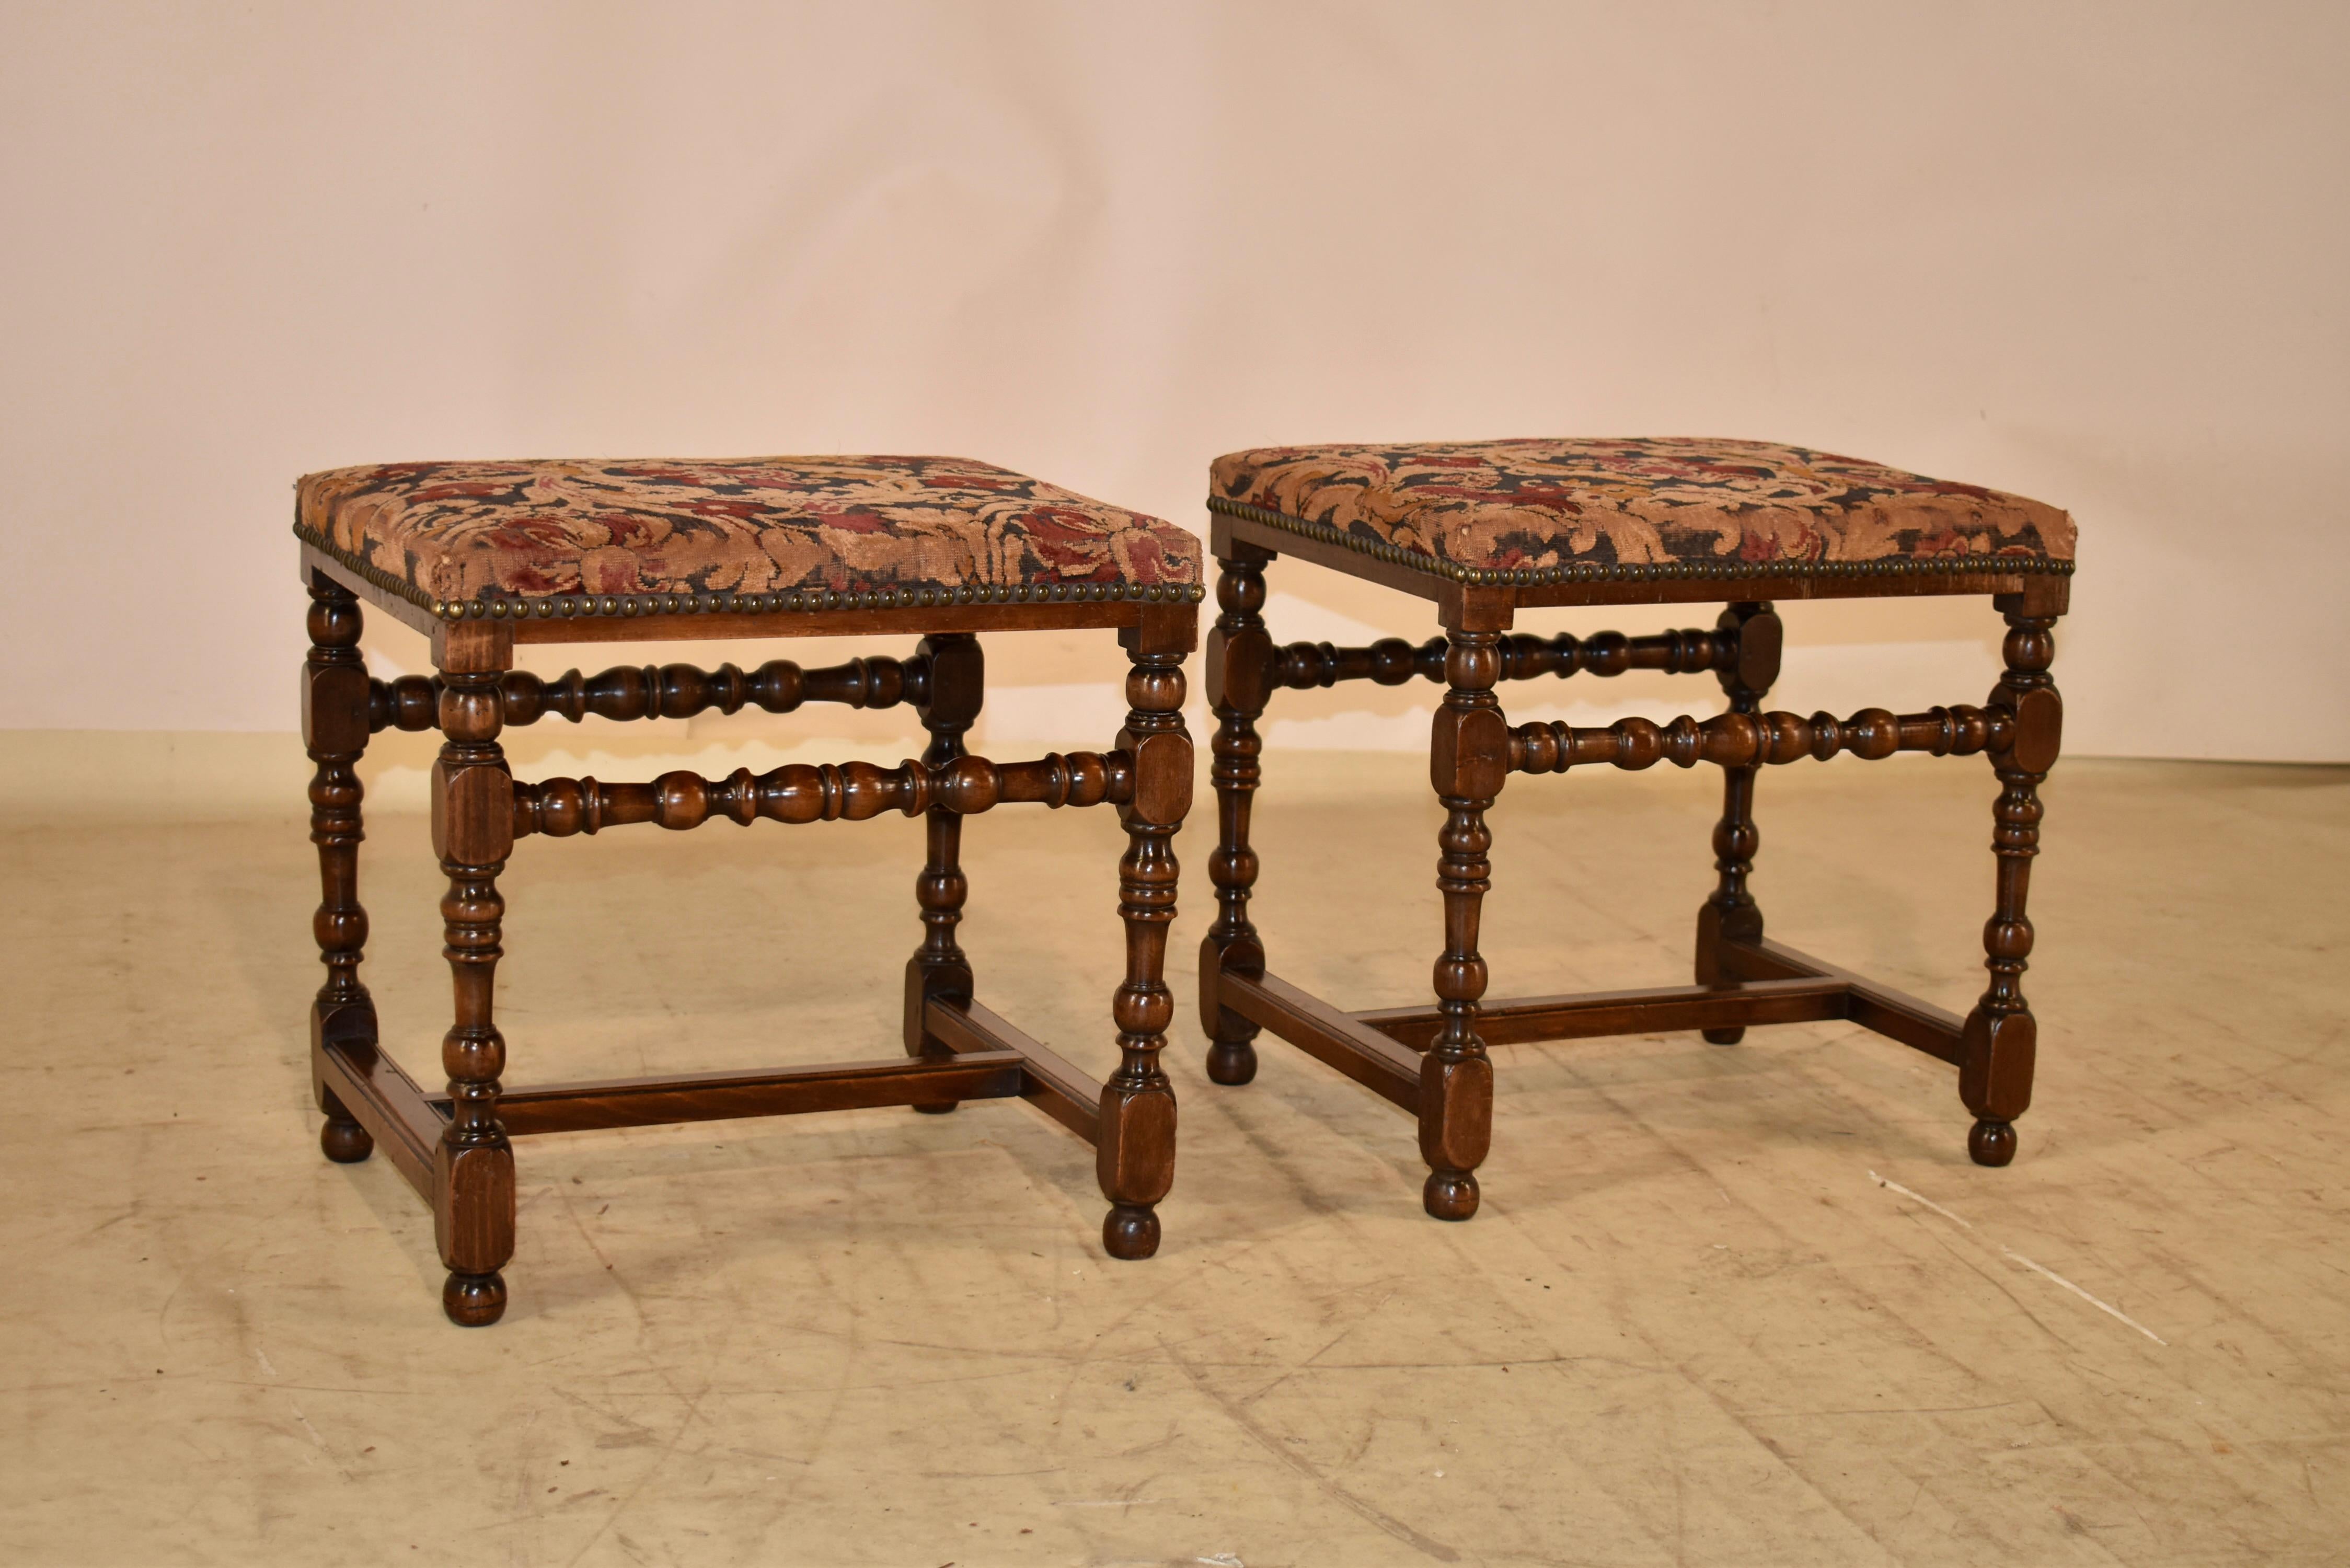 18th century pair of walnut stools from England.  The seats are covered in what appear to be original needlepoints, decorated with nail head trim.  The frames of the stools are made from hand turned walnut and have simple and elegant lines.  The